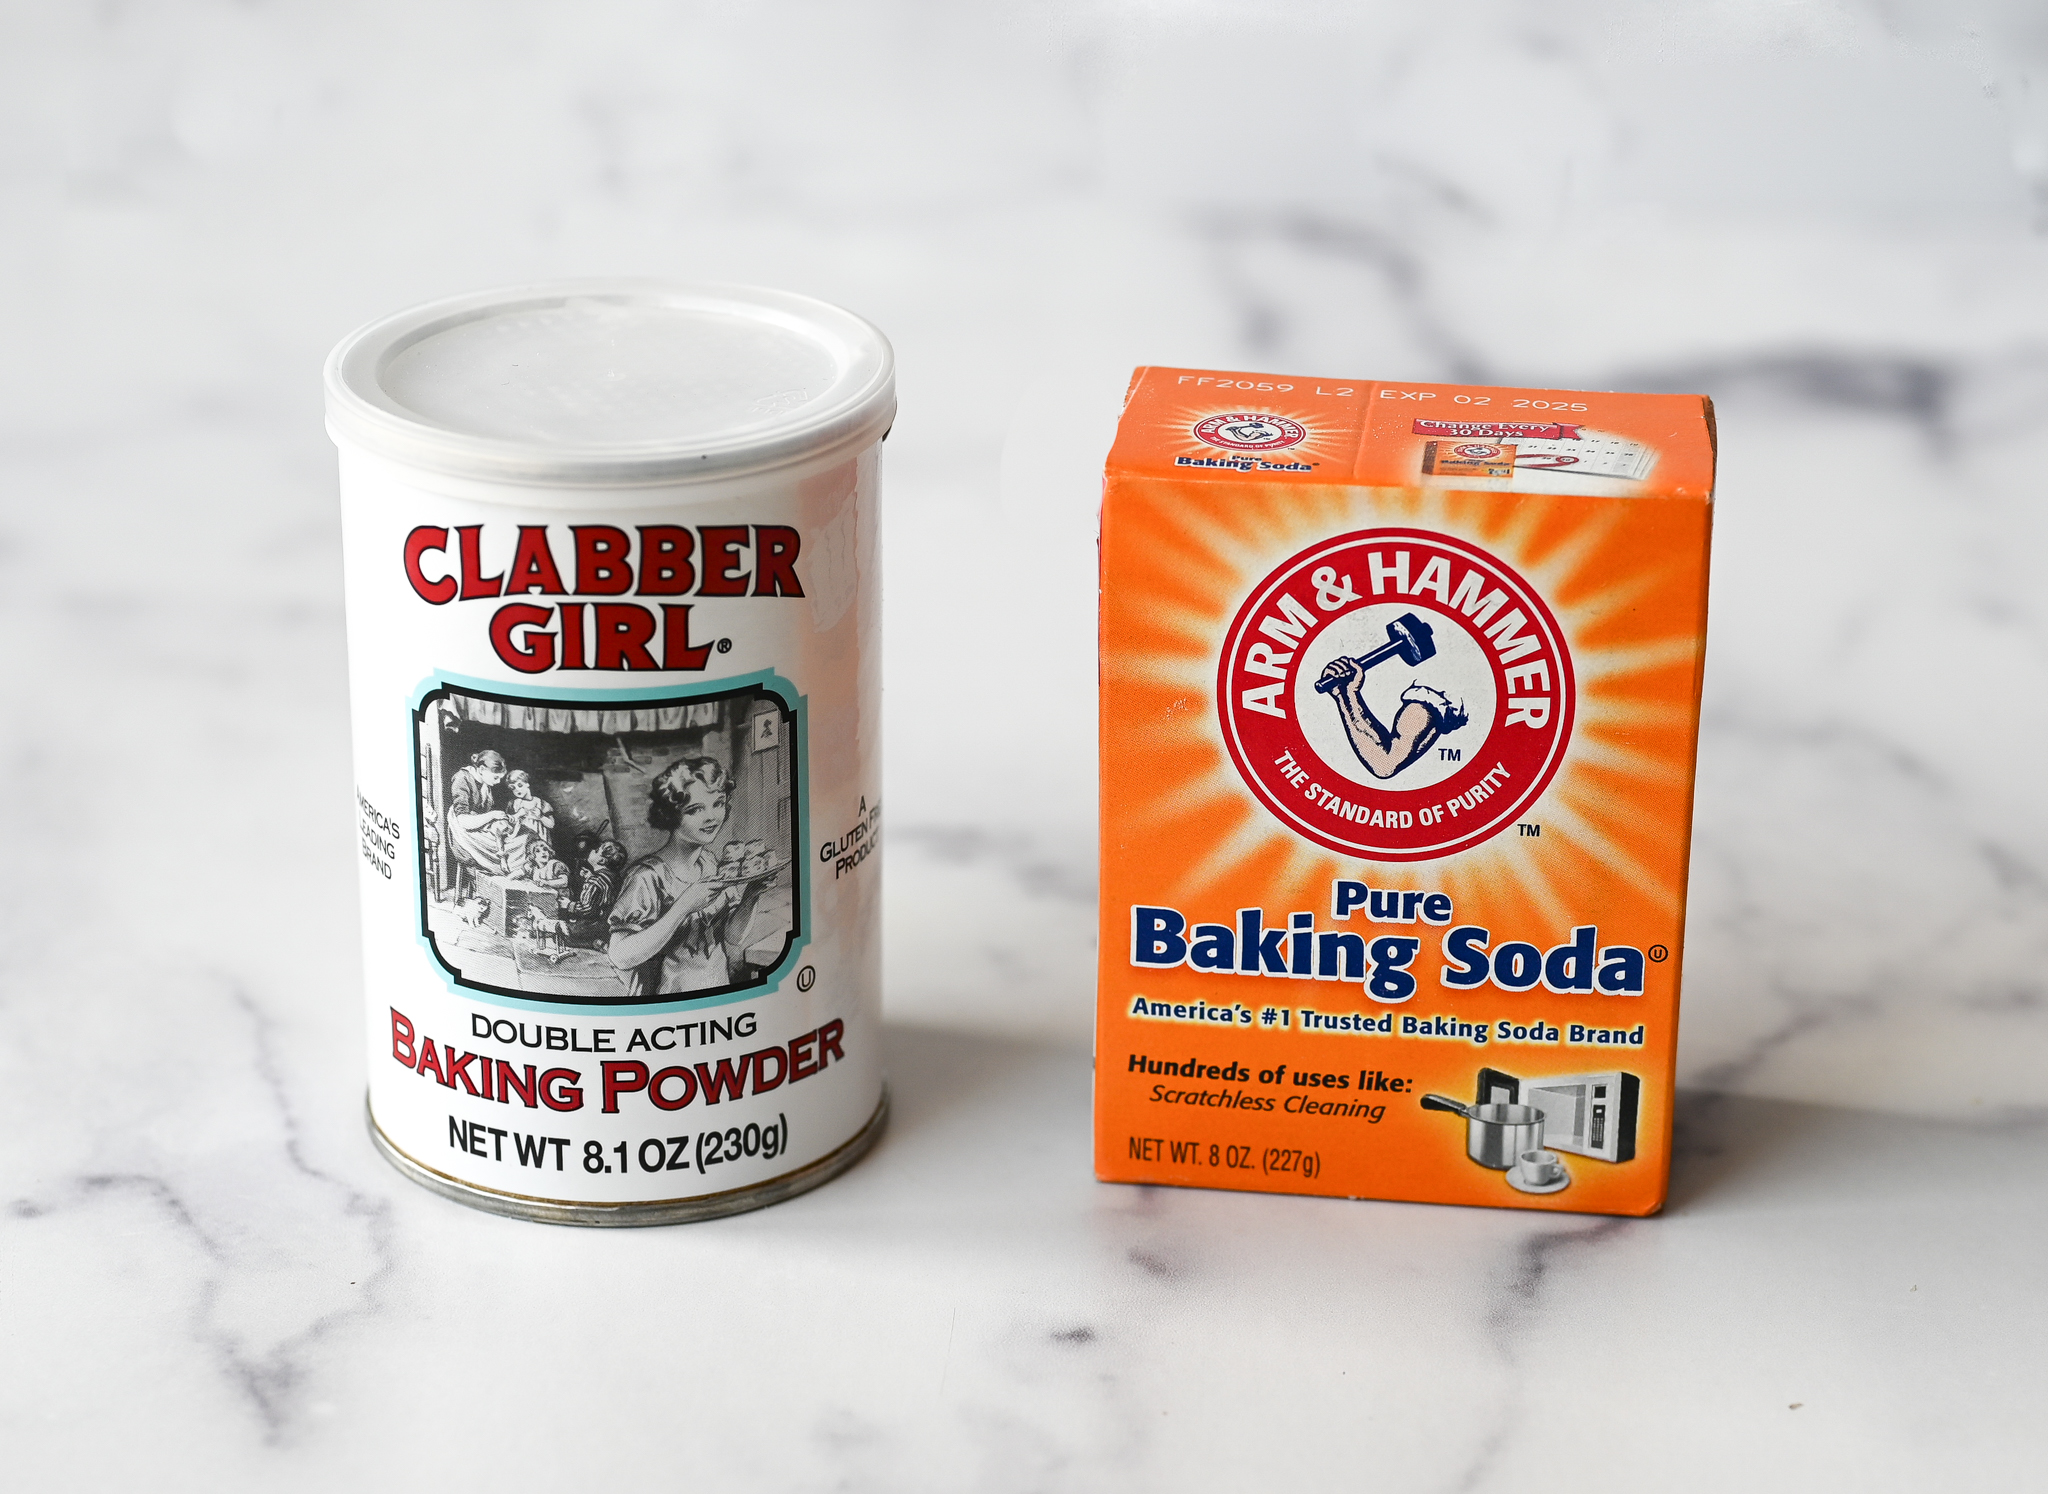 What Does Baking Soda Do?